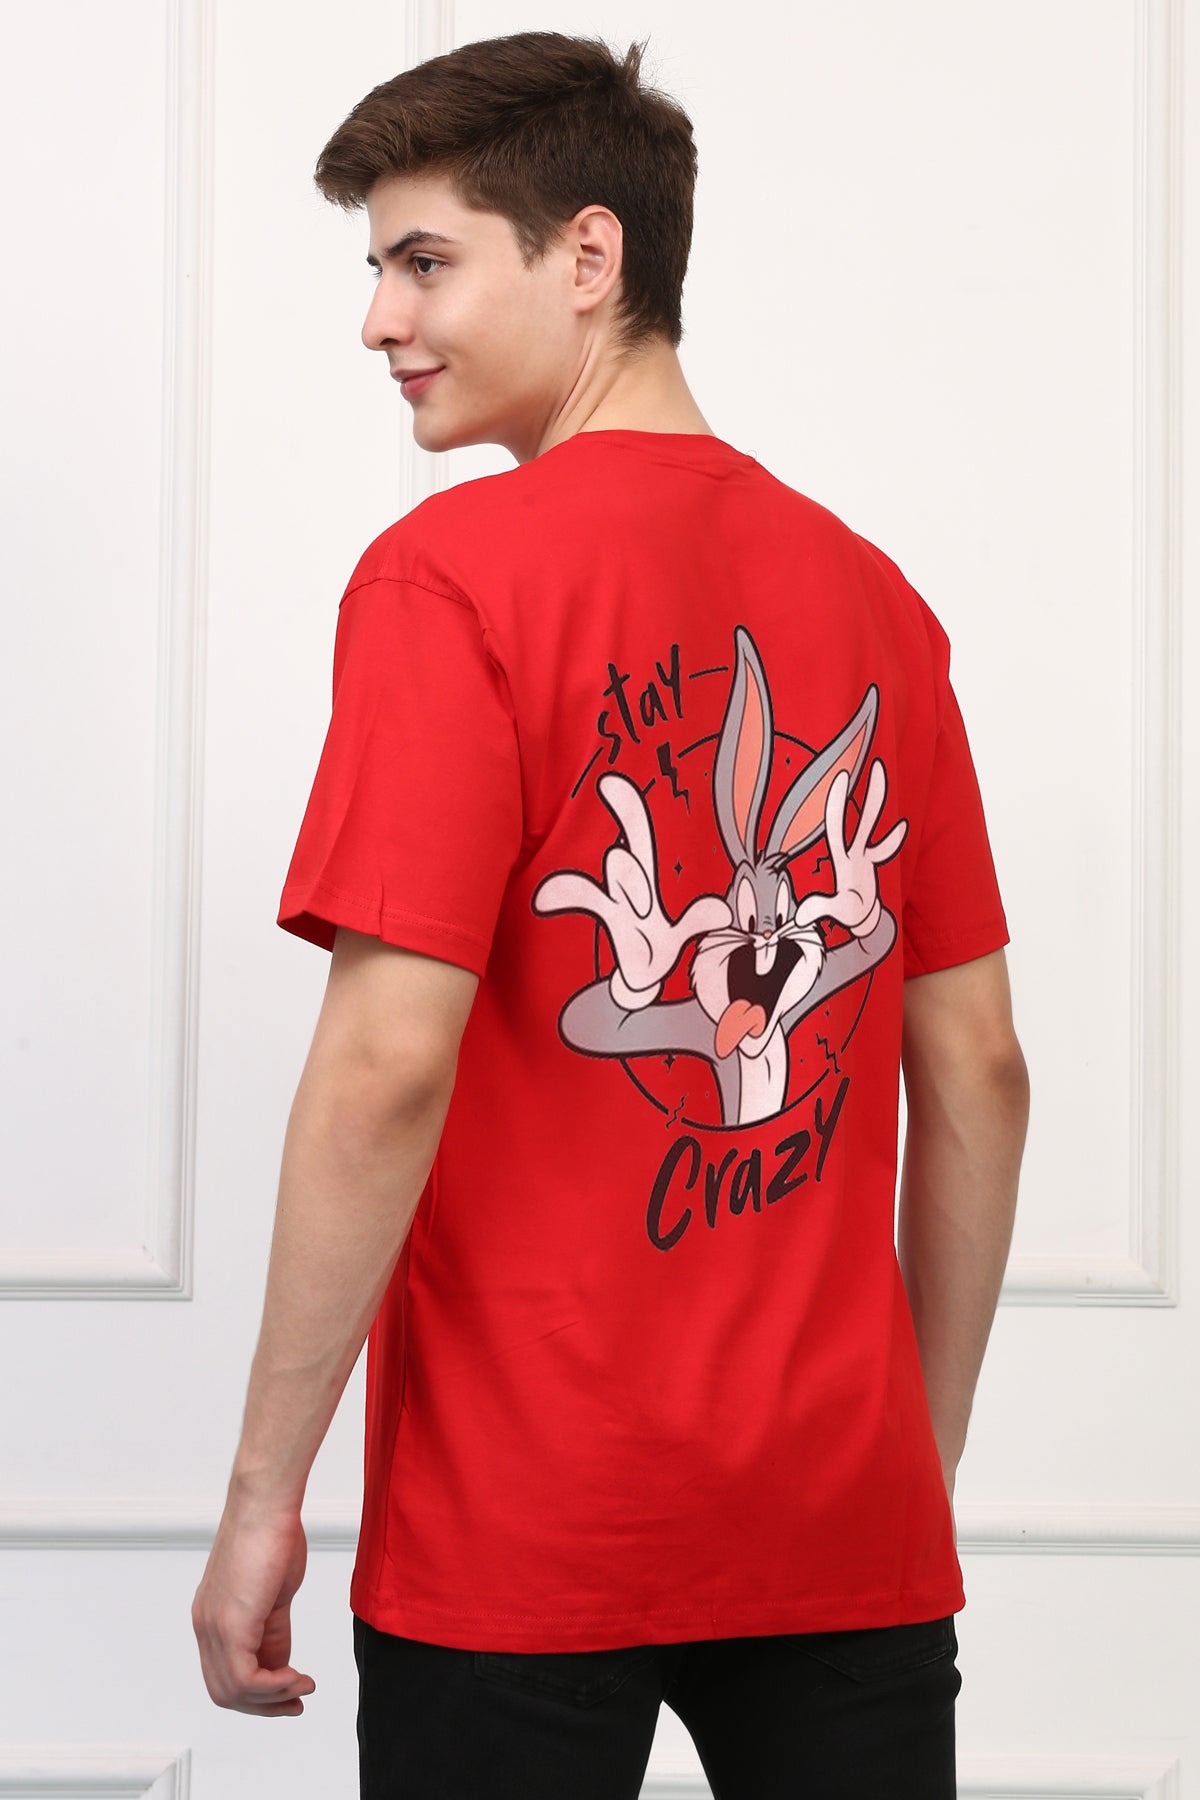 Oversized Stay Crazy Cartoons Printed Tshirt